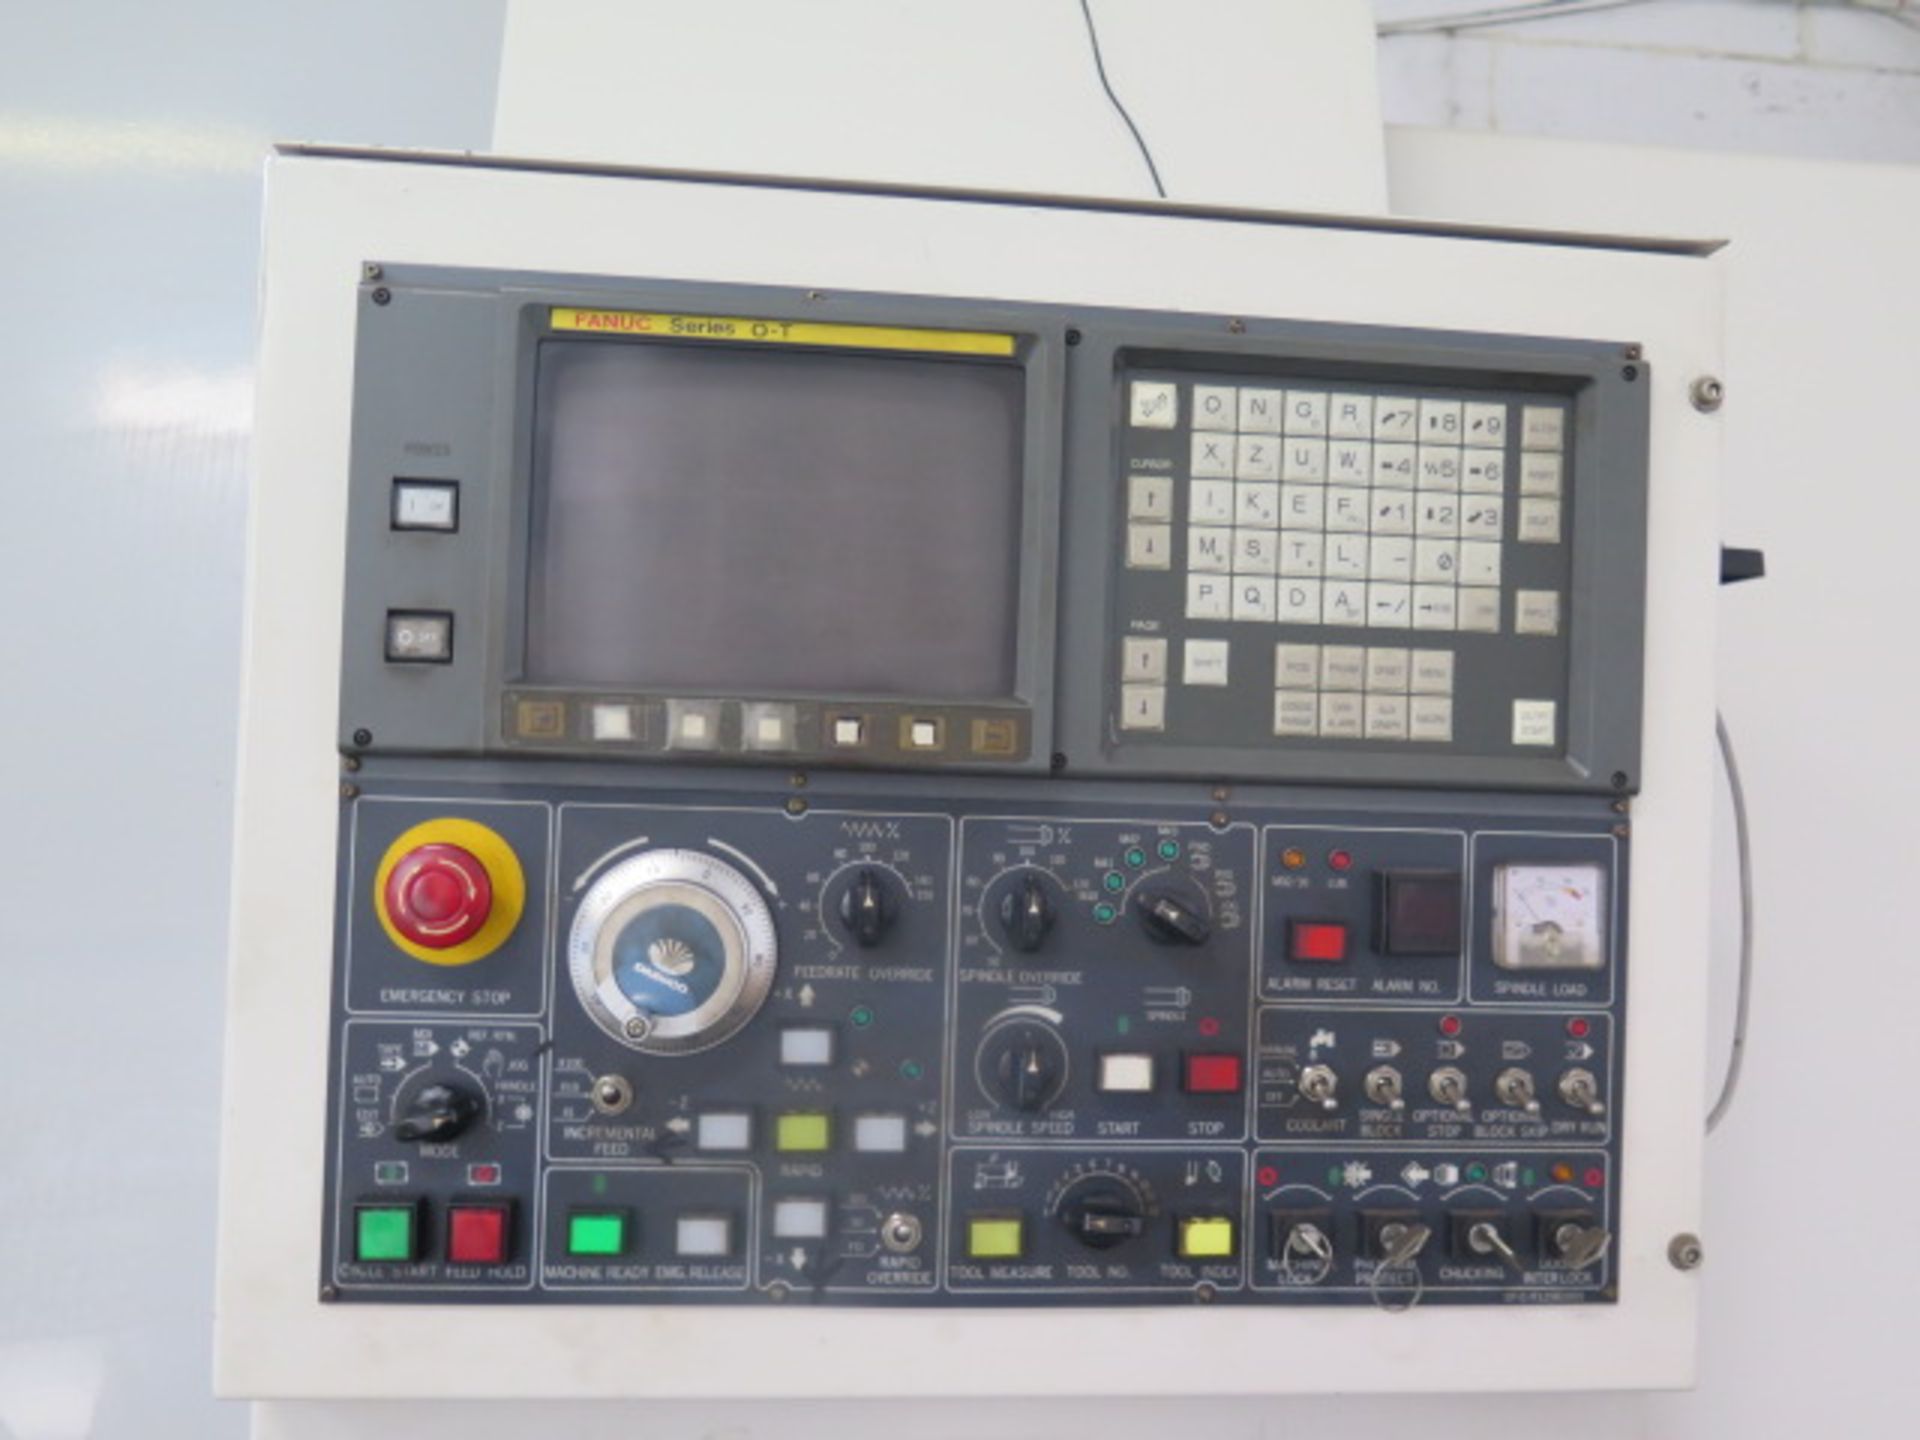 1998 Daewoo PUMA 450A CNC Turning Center s/n PM450114 w/ Fanuc 0-T Controls, 12-Station, SOLD AS IS - Image 11 of 15